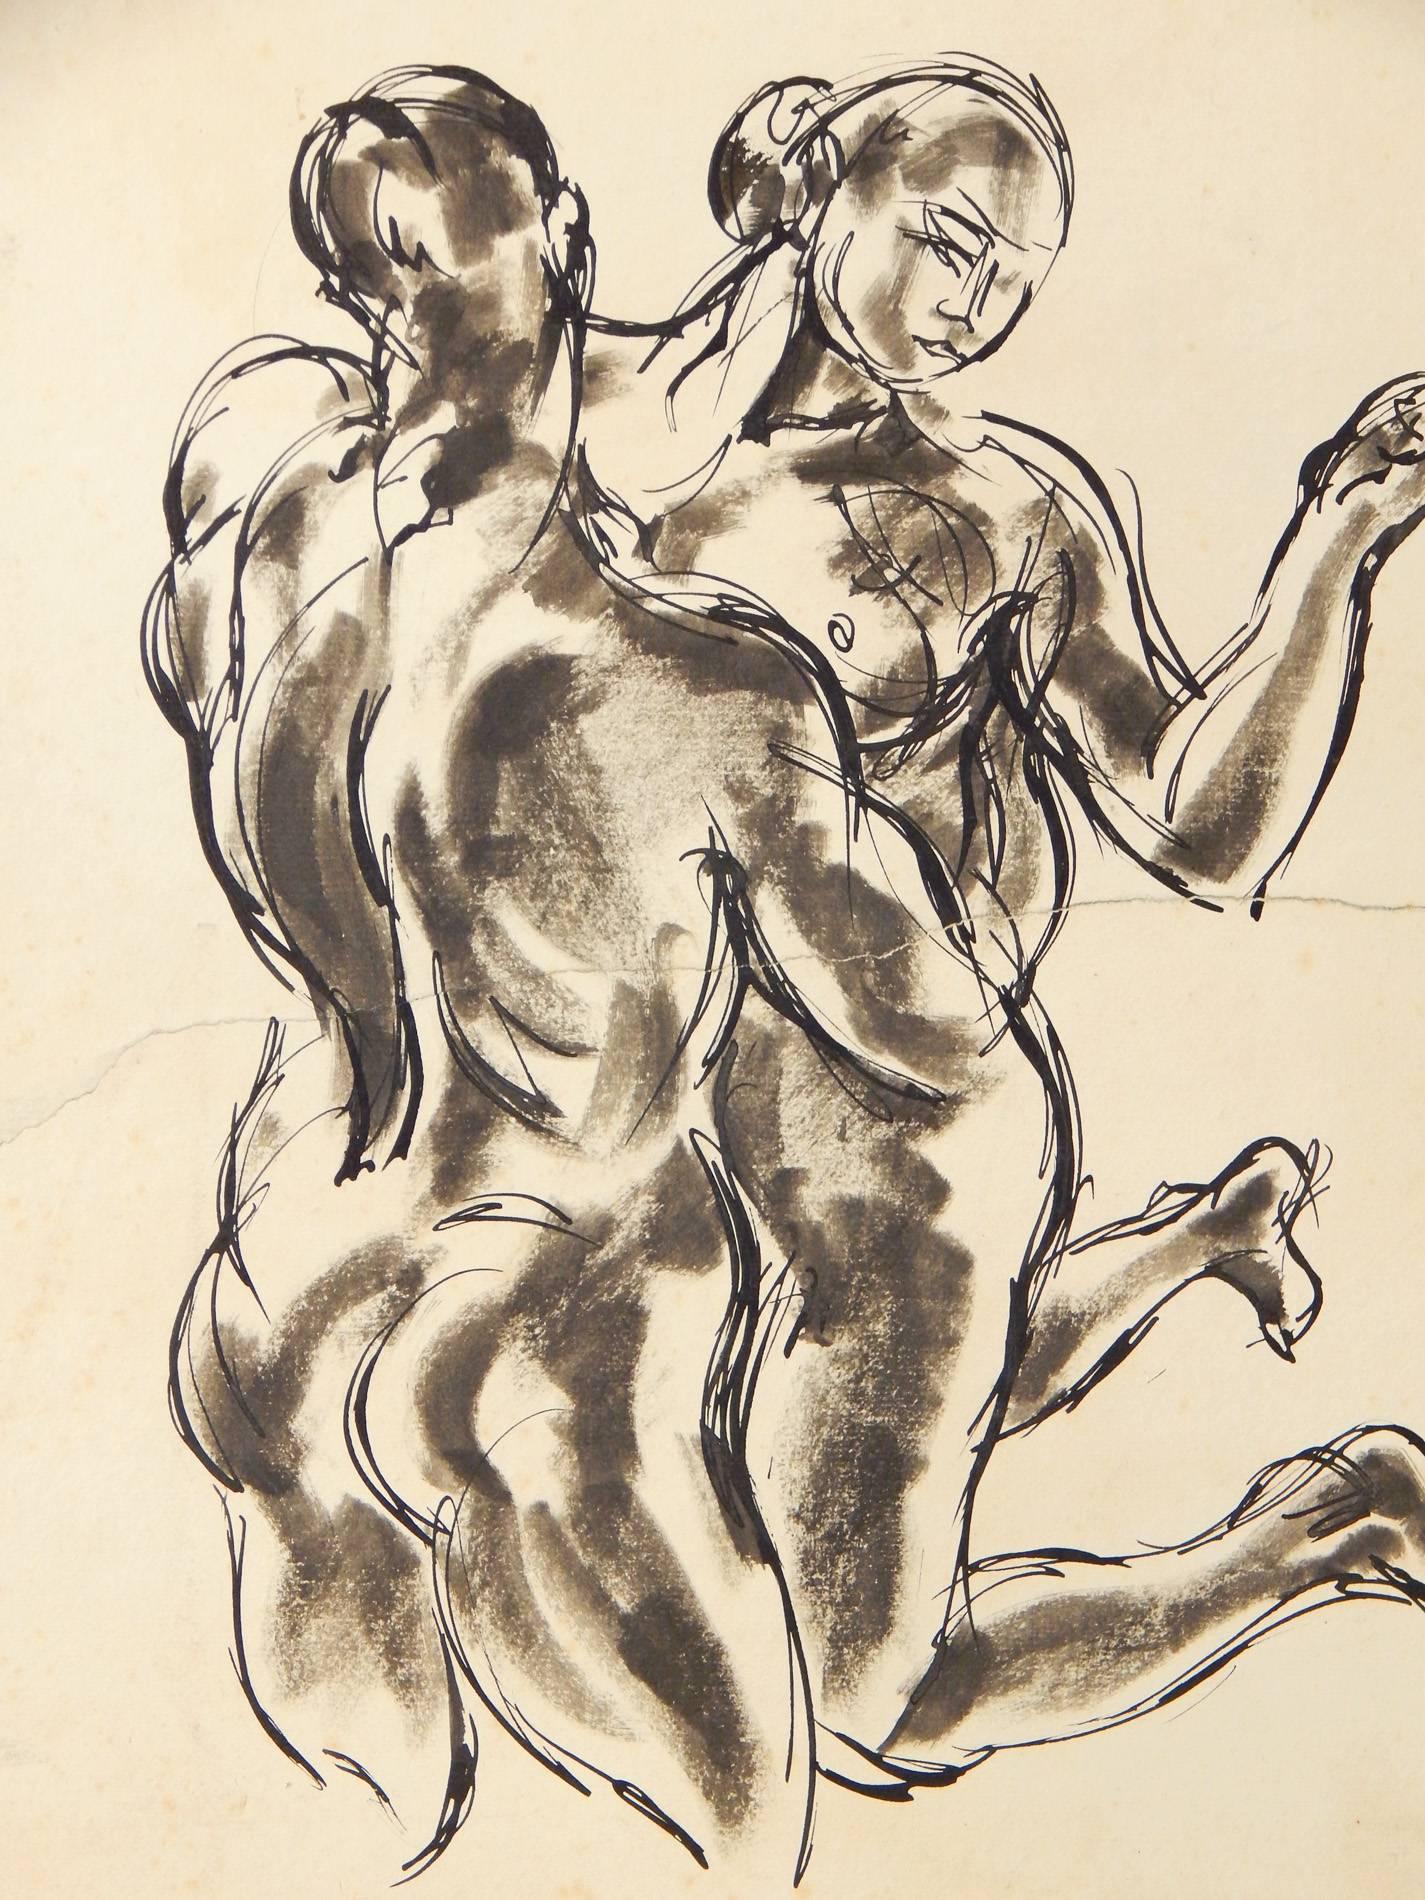 A fine and bold drawing by William Littlefield, this piece depicts male and female nude figures in an embrace, the male figure inspired by Nicholas Podiapolski, Littlefield's model and lover in the late 1920s. Littlefield is known for his male nudes